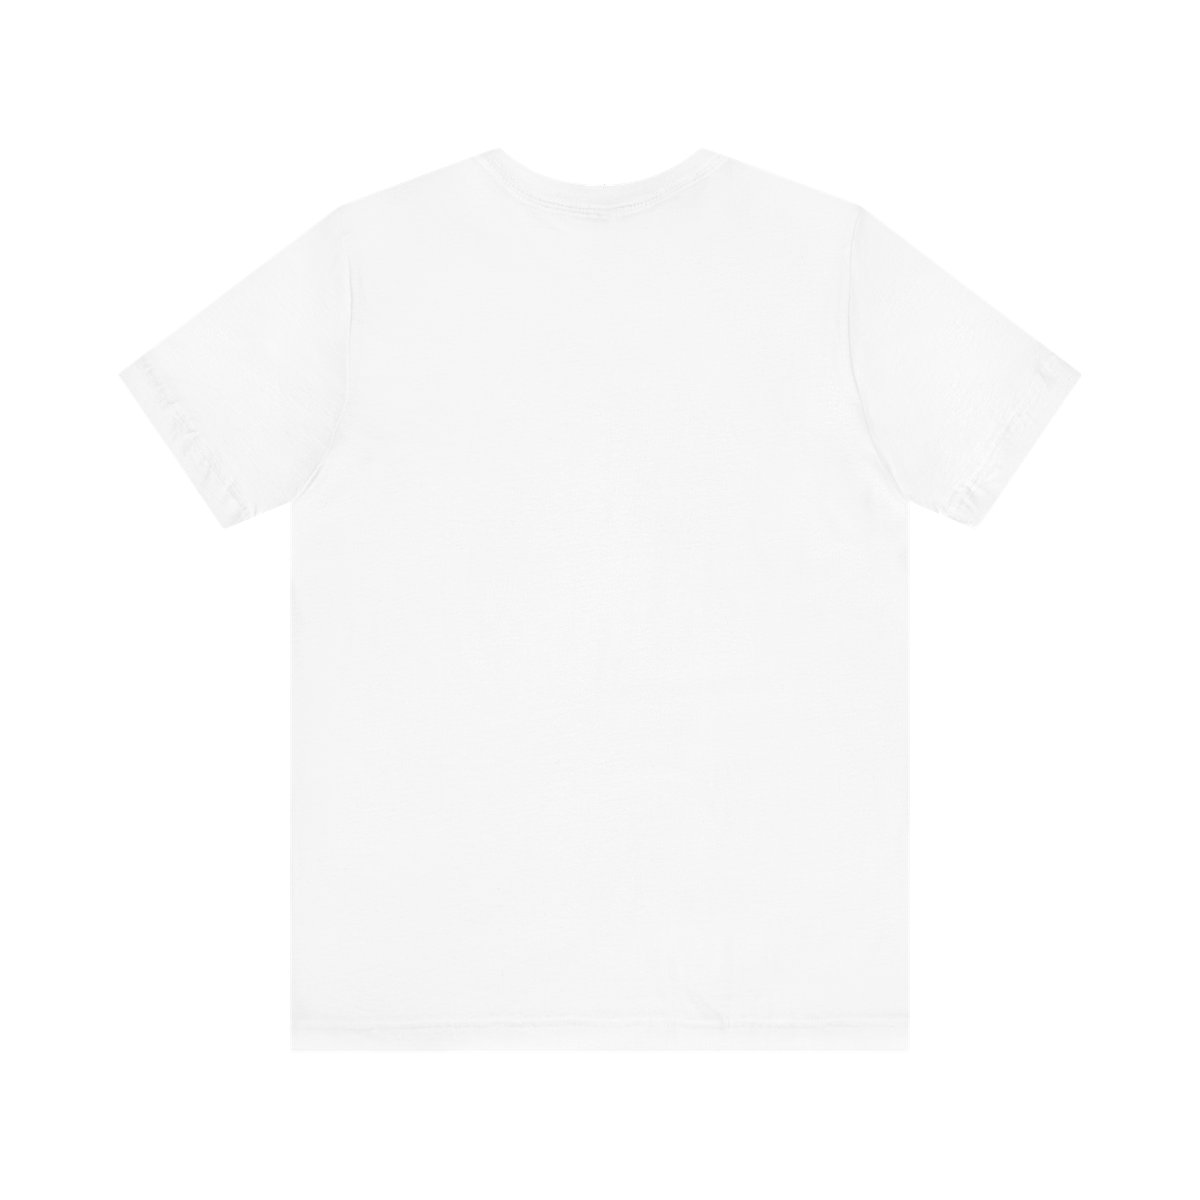 Go Home and Water Your Plants Short Sleeve Unisex T-Shirt product thumbnail image